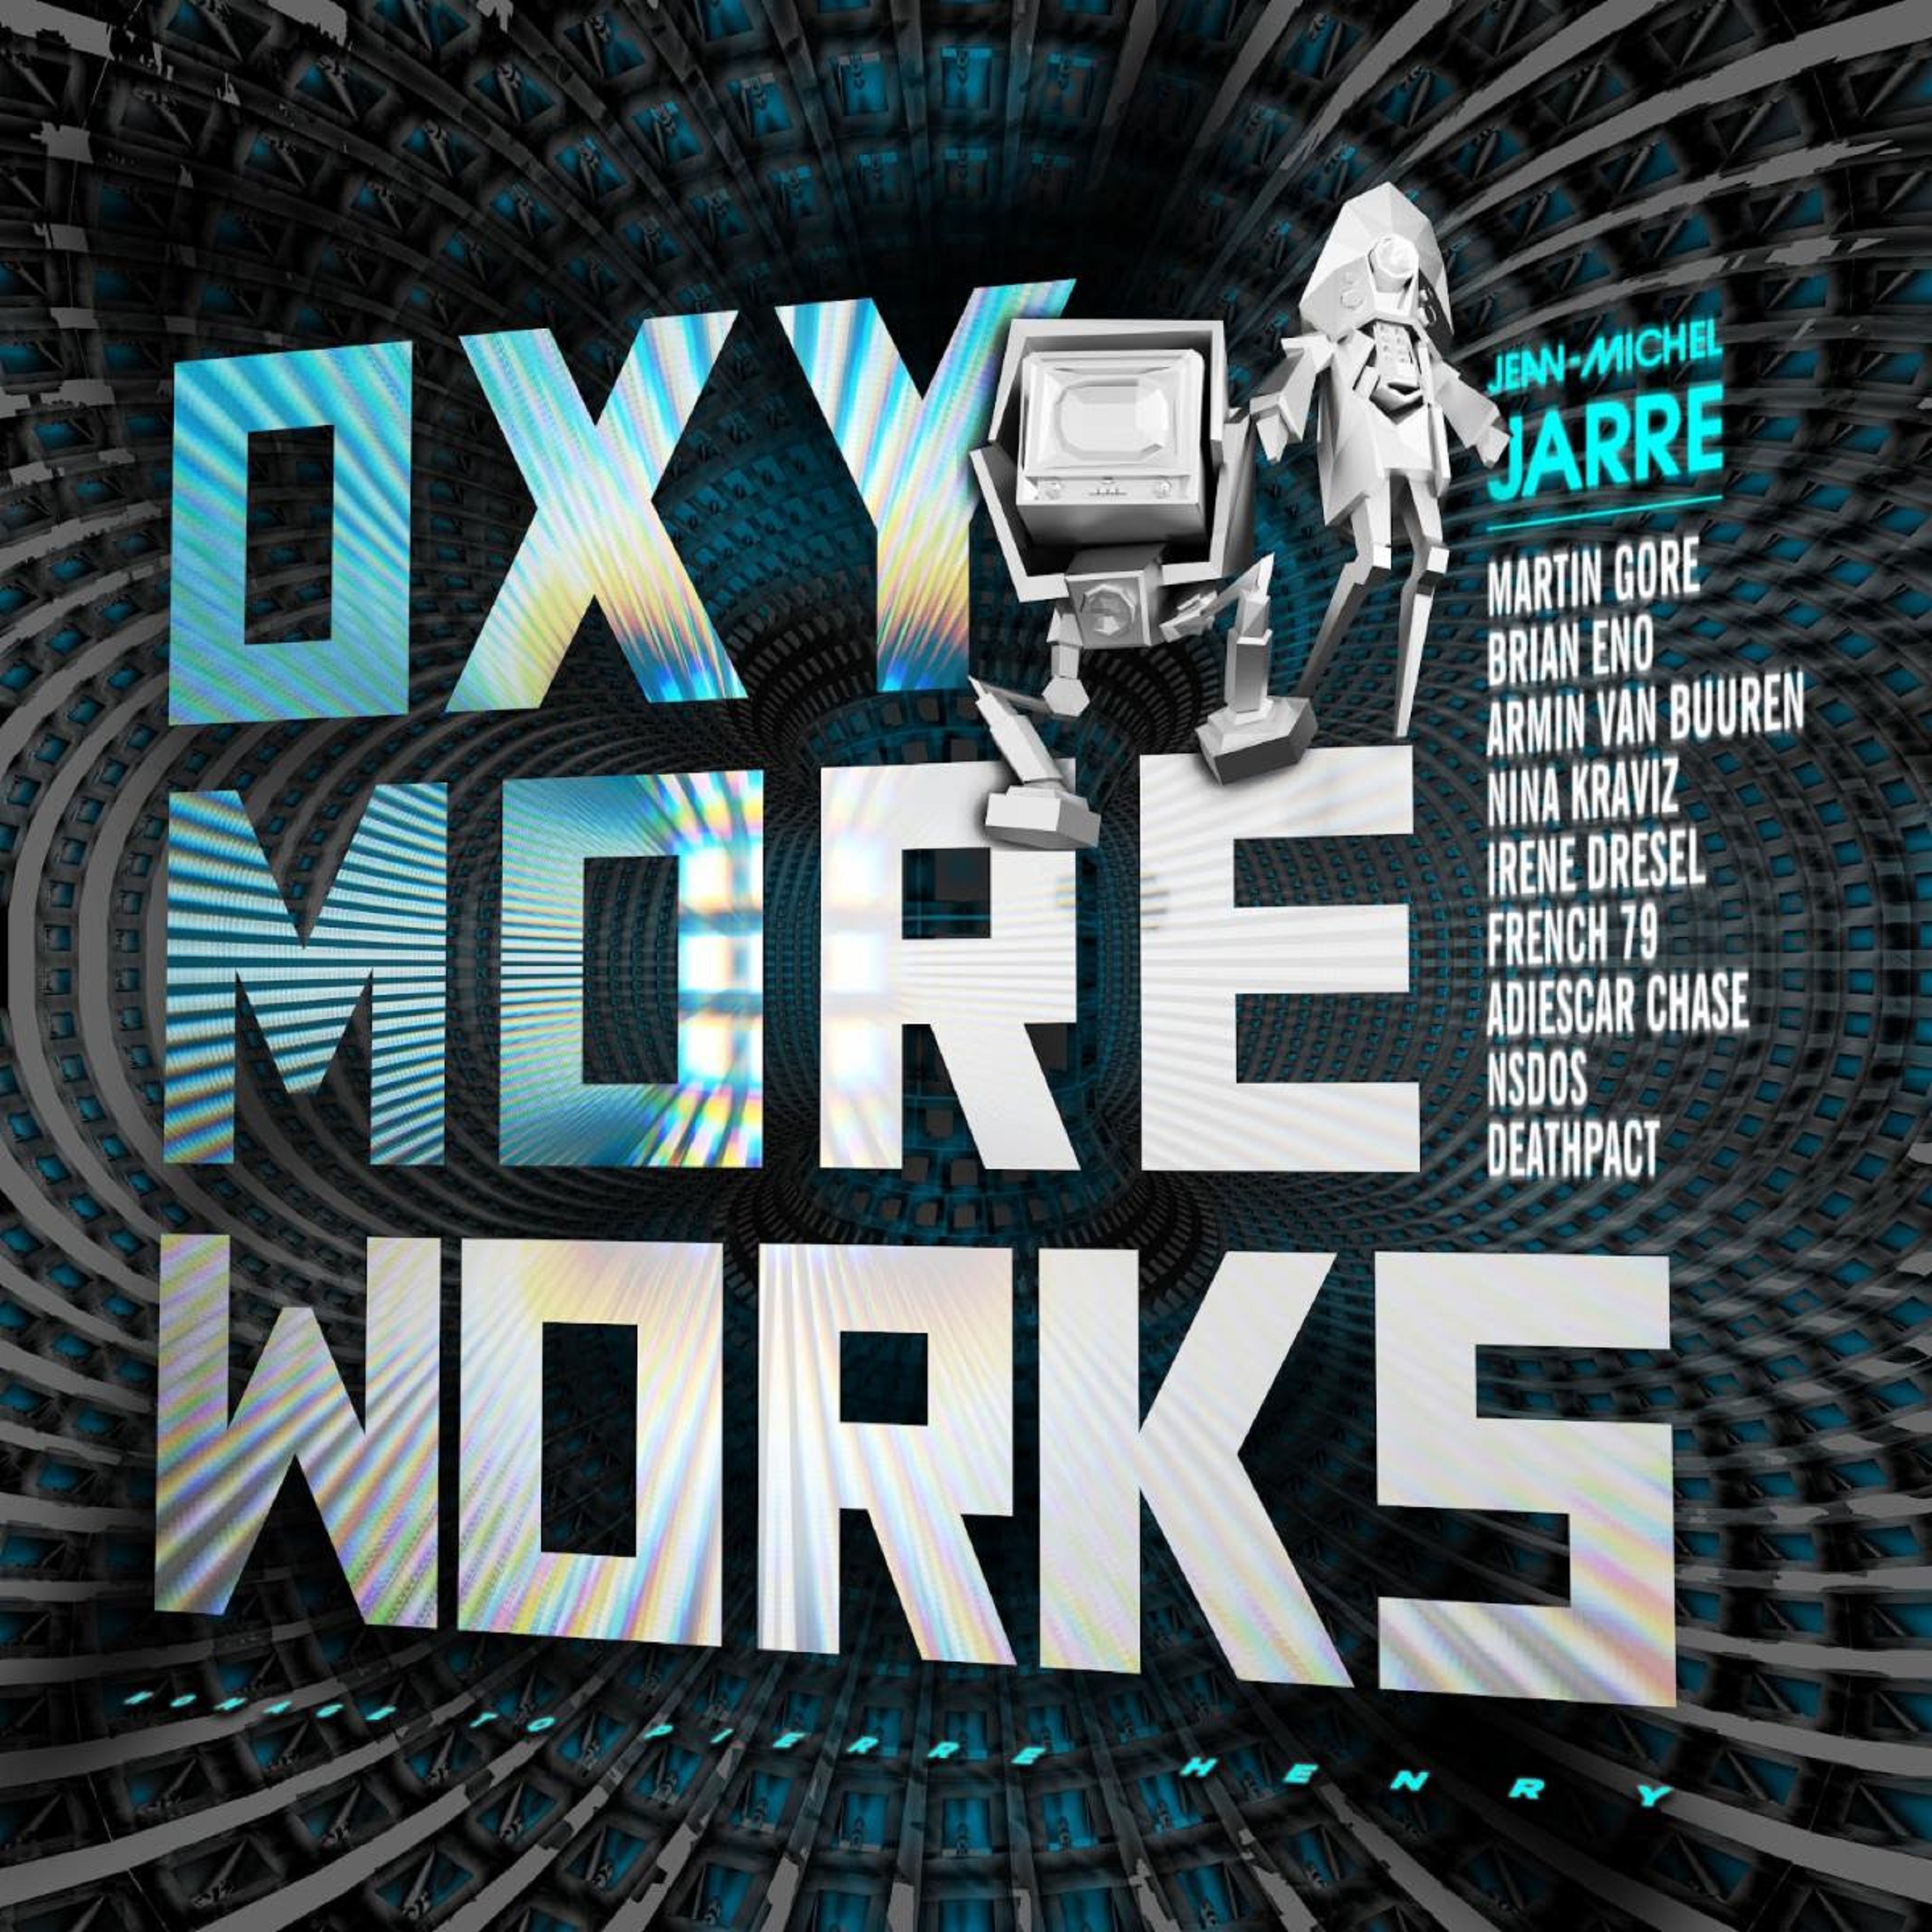 Jean-Michel Jarre And Armin Van Buuren Reveal New Collaboration “EPICA MAXIMA” Included On 'OXYMOREWORKS' Out Now